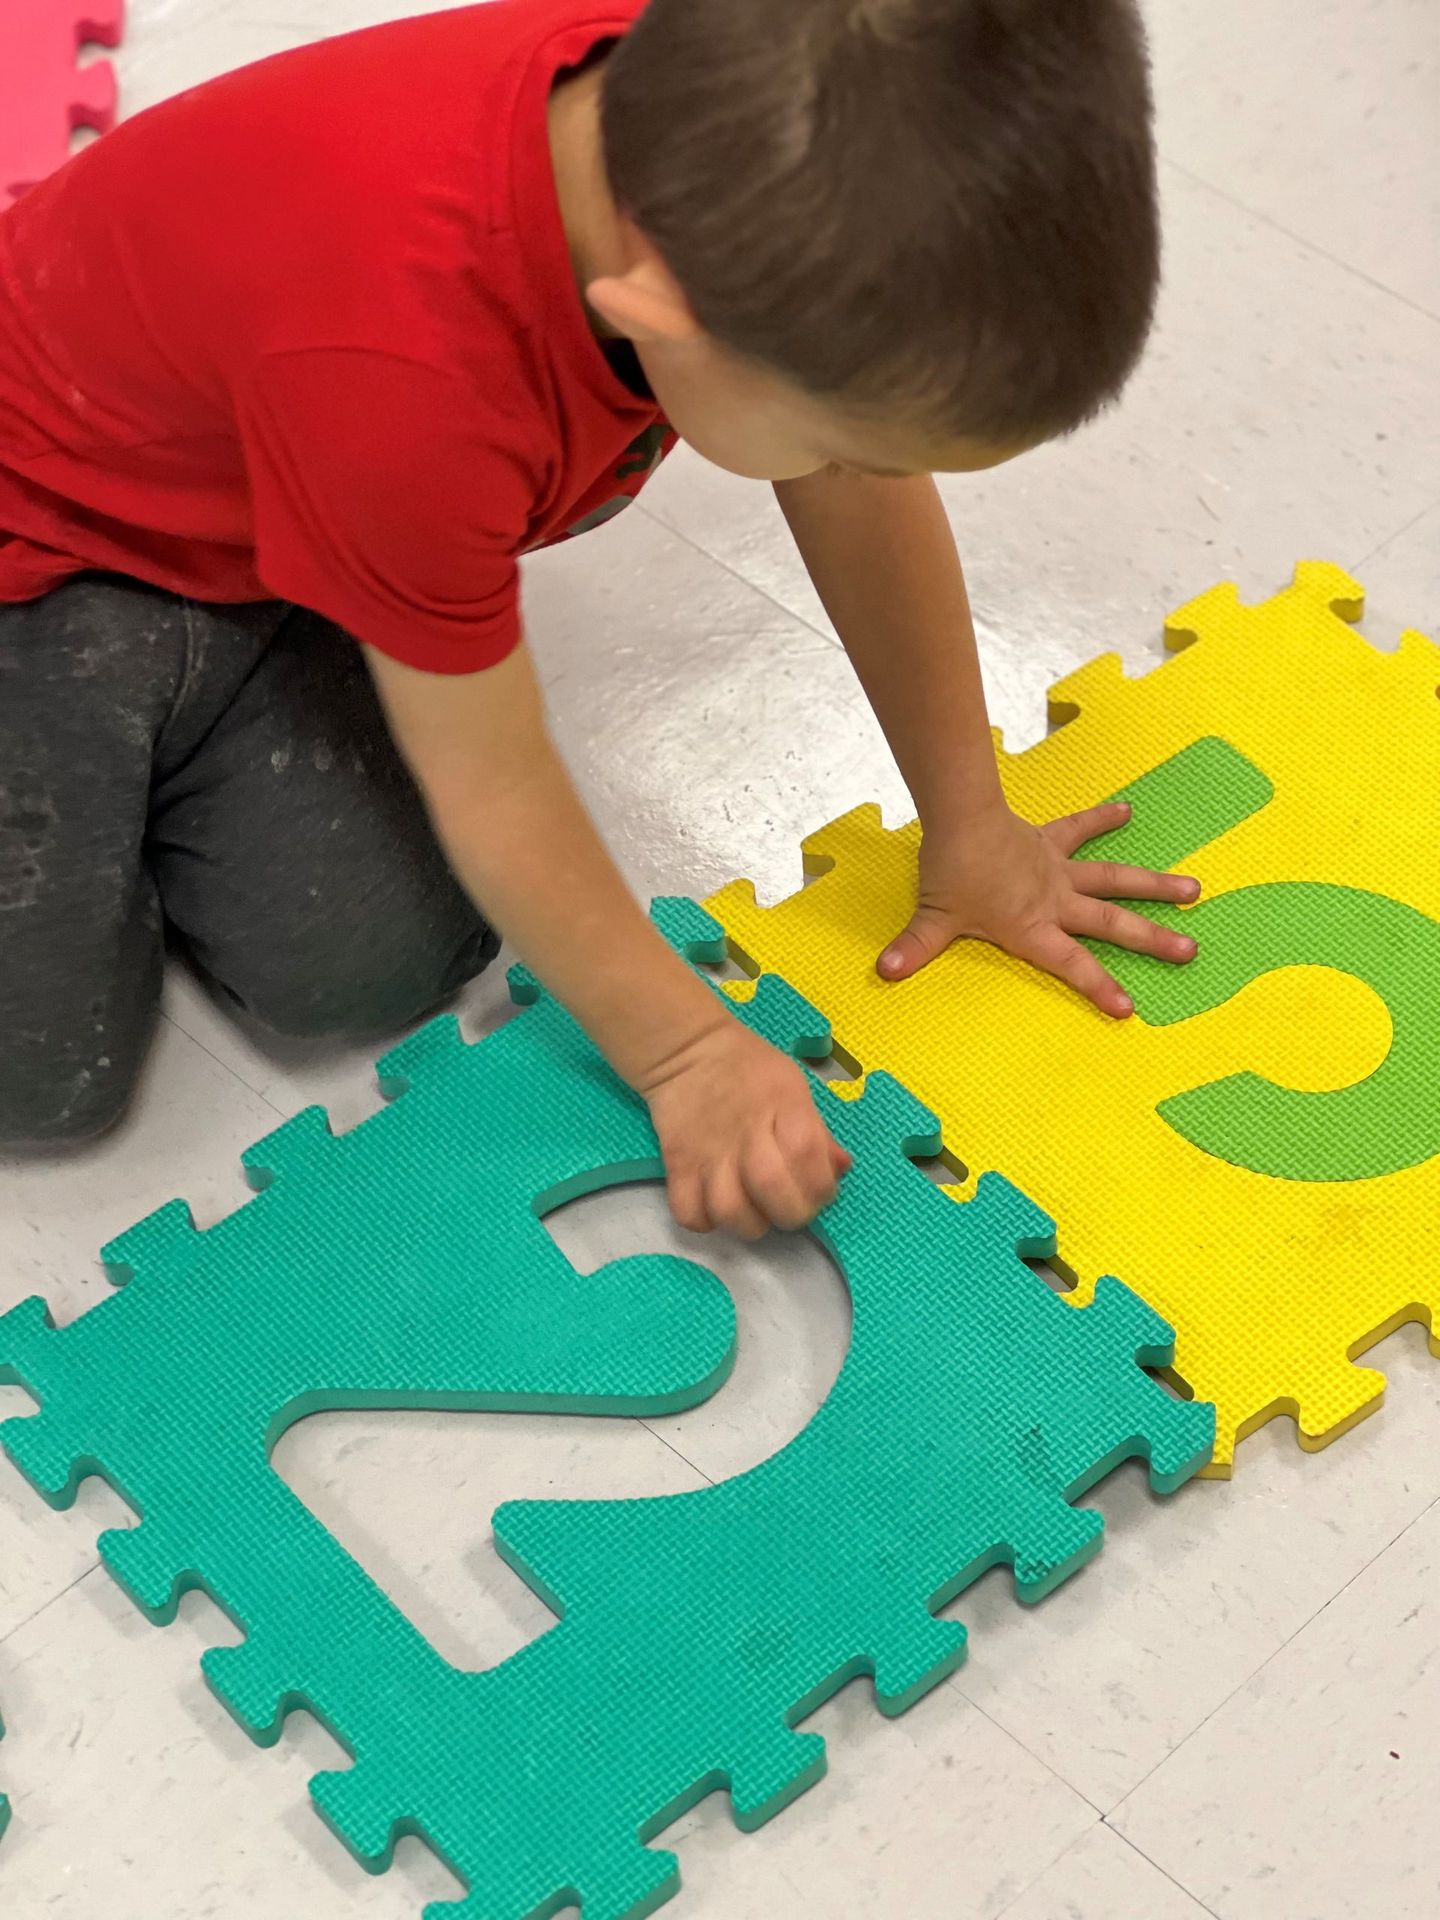 a young boy is playing with a puzzle mat on the floor .